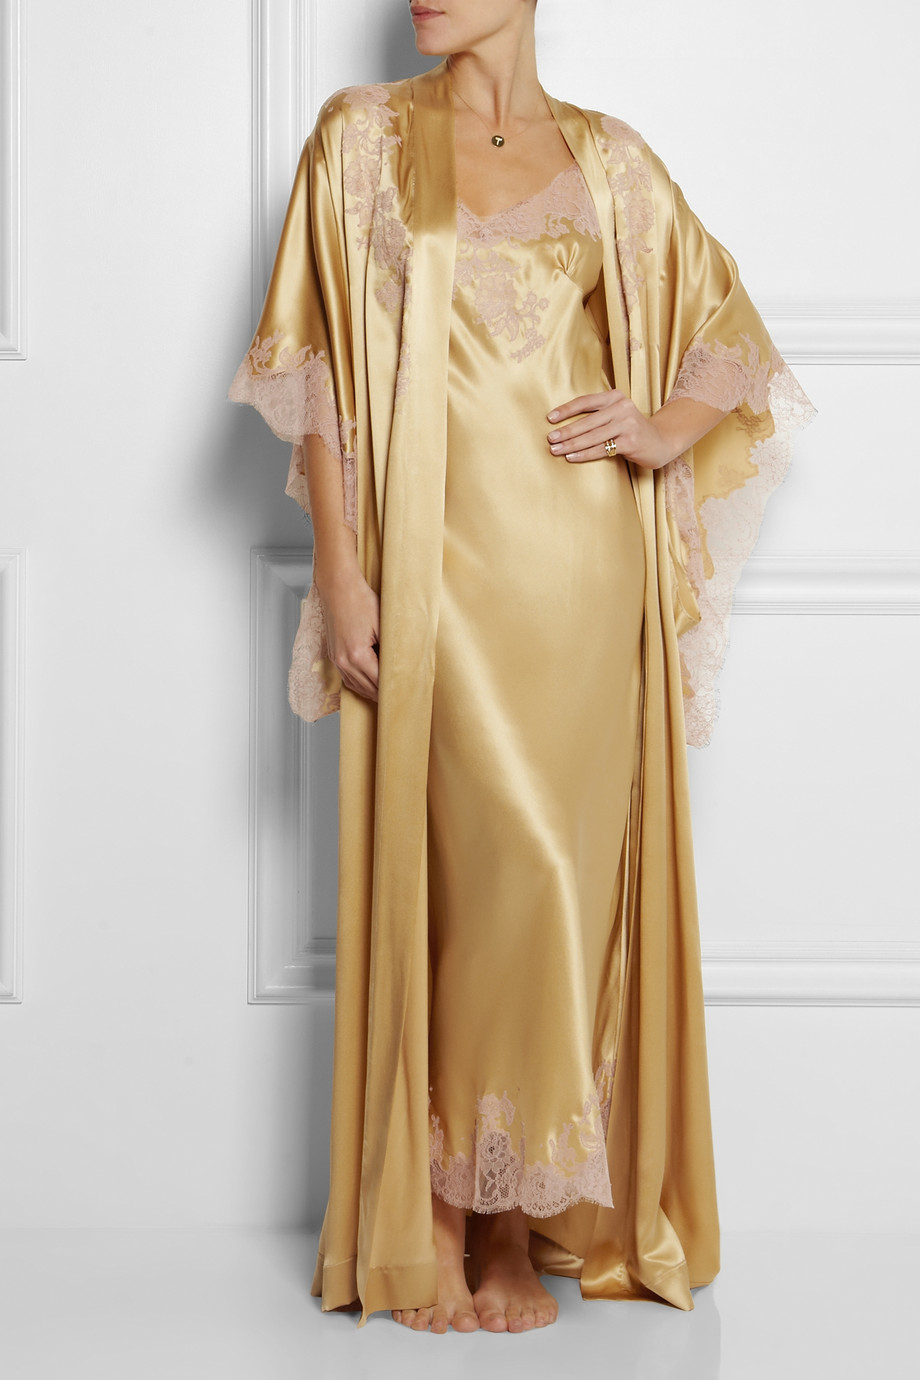 Lyst Carine Gilson Lace Trimmed Silk Satin Mousseliné Robe In Metallic 